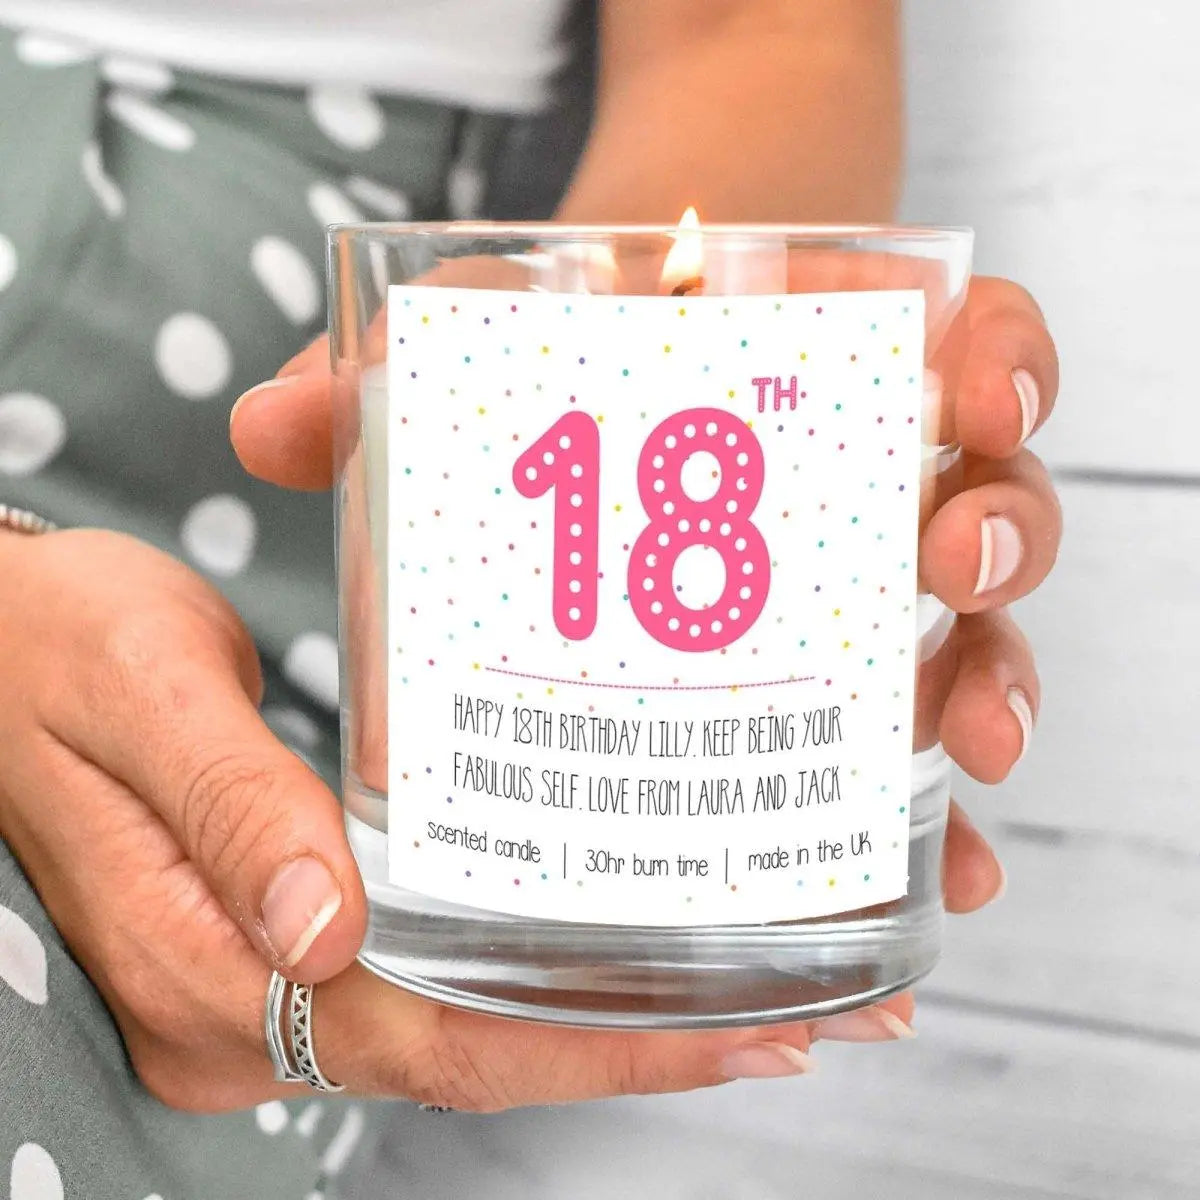 Personalised 18th Birthday Candle, Personalized Birthday Candle Gift, 21st Birthday Gift, Milestone Birthday Present, For Her, Any Age Gift - Amy Lucy